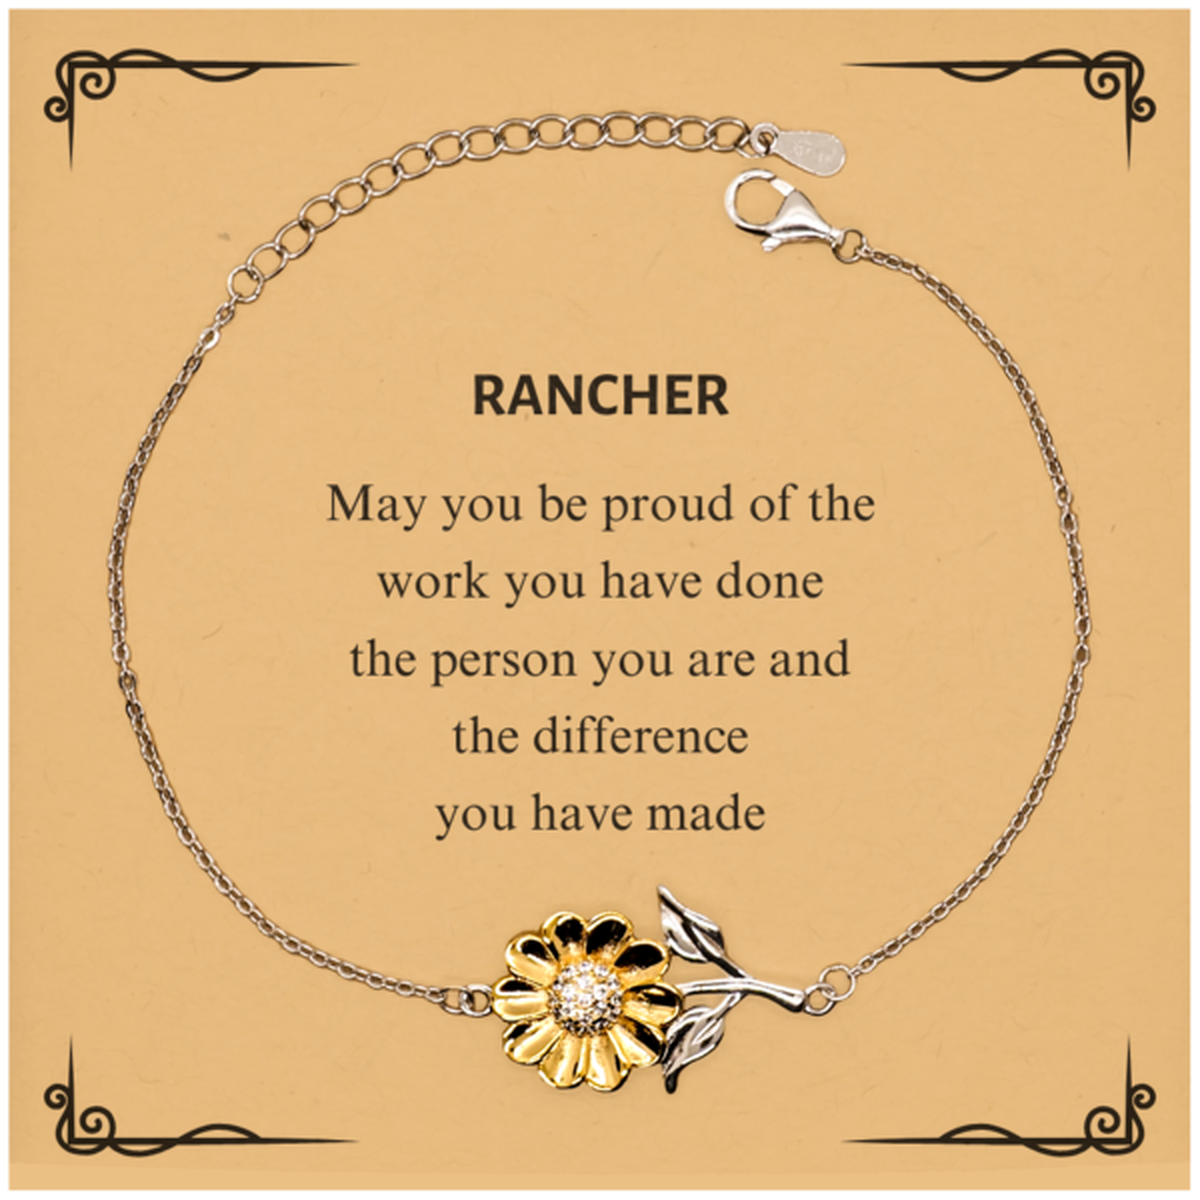 Rancher May you be proud of the work you have done, Retirement Rancher Sunflower Bracelet for Colleague Appreciation Gifts Amazing for Rancher